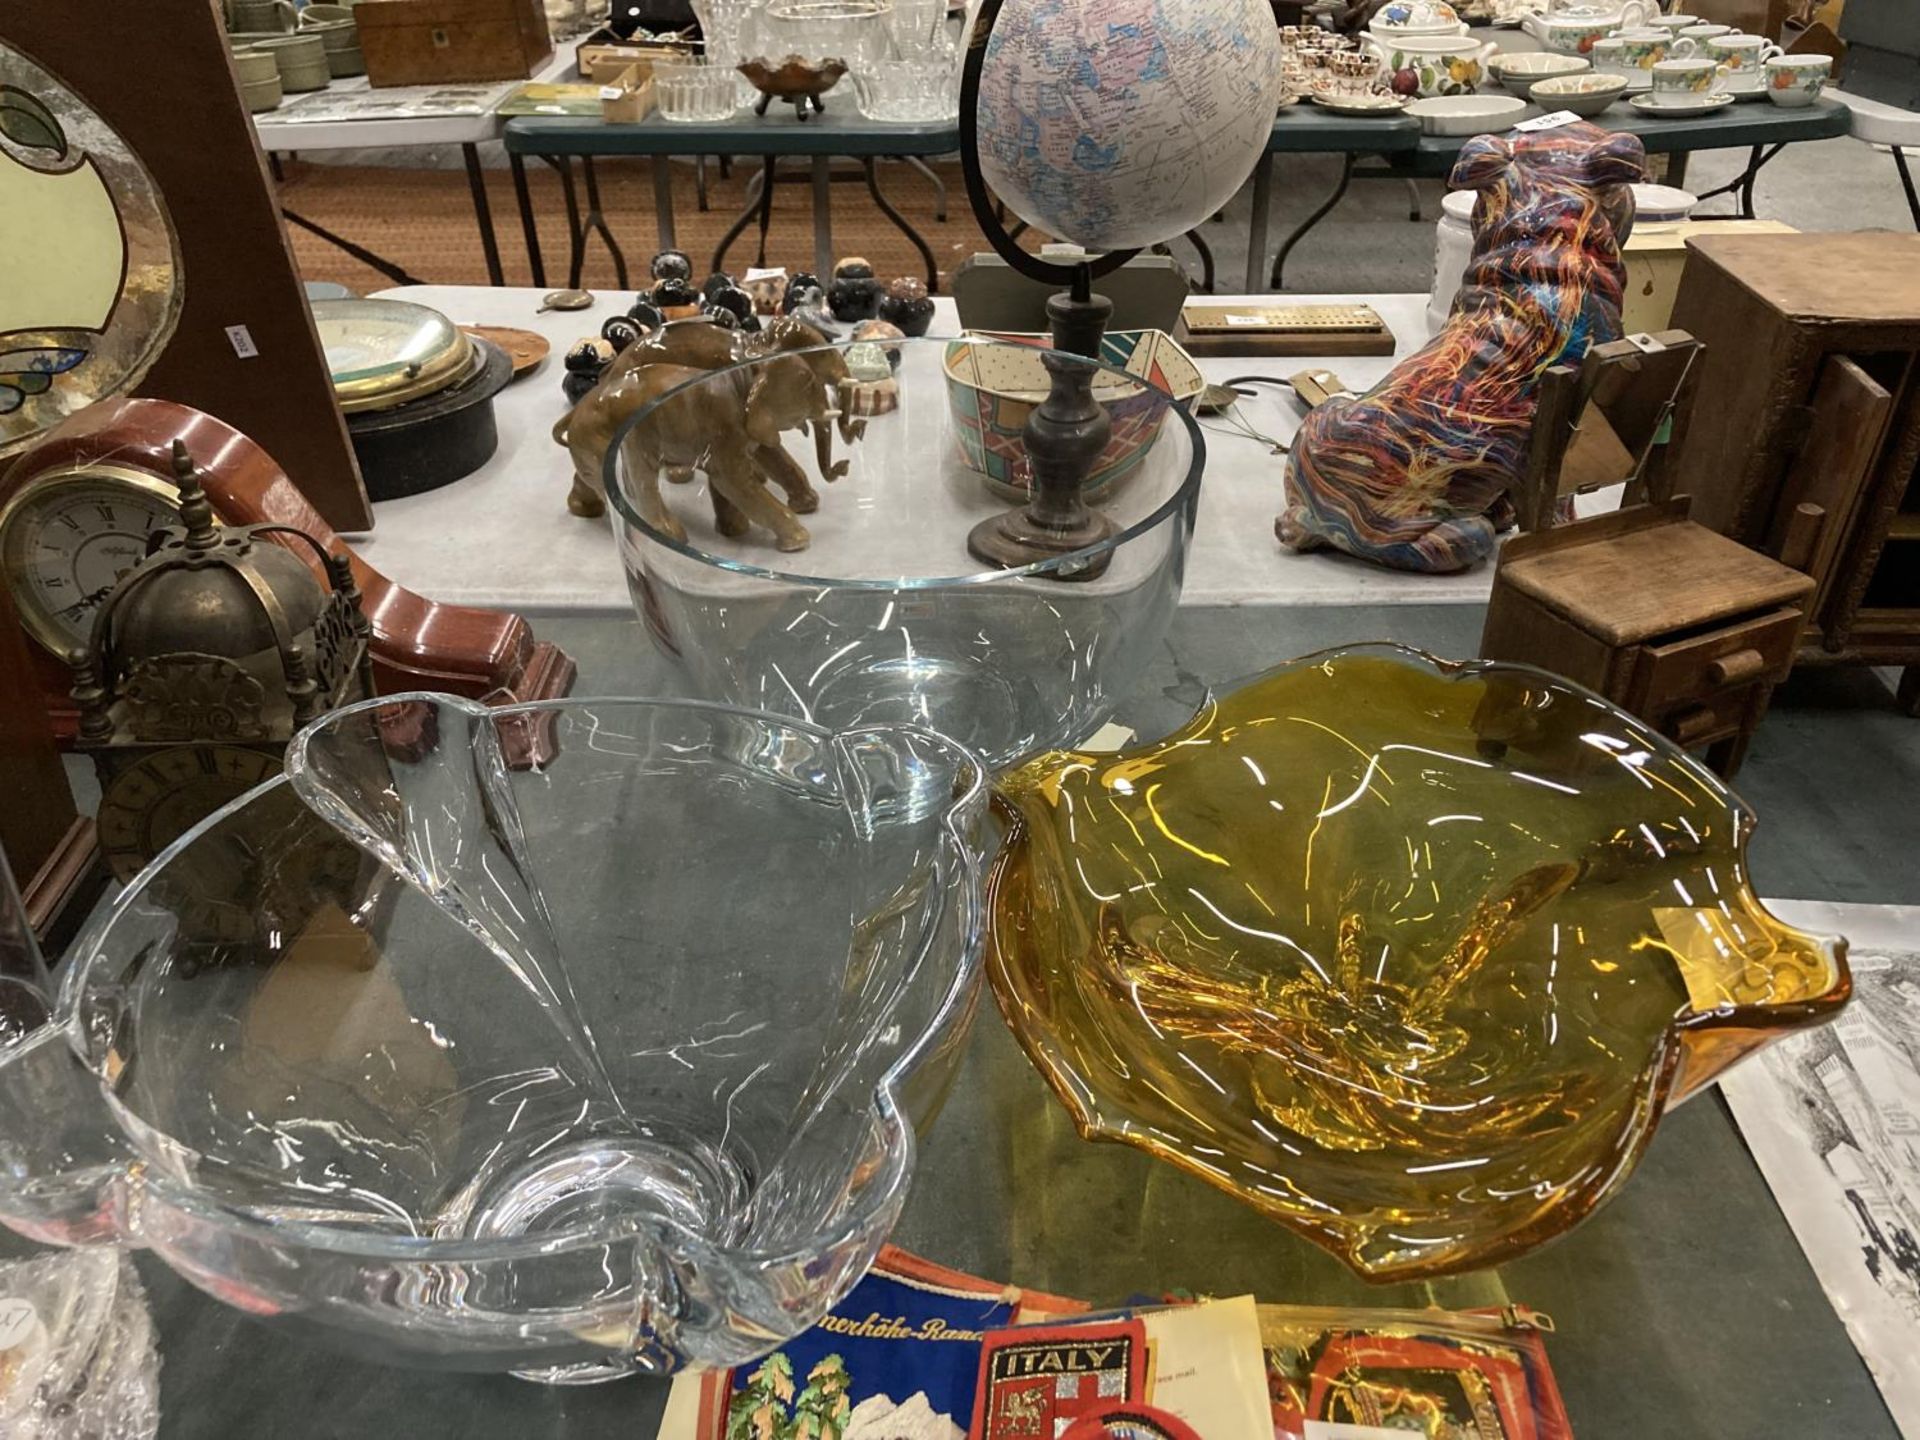 THREE LARGE HEAVY STUDIO GLASS BOWLS TO INCLUDE AN AMBER ONE - ONE WITH A CHIP TO THE RIM